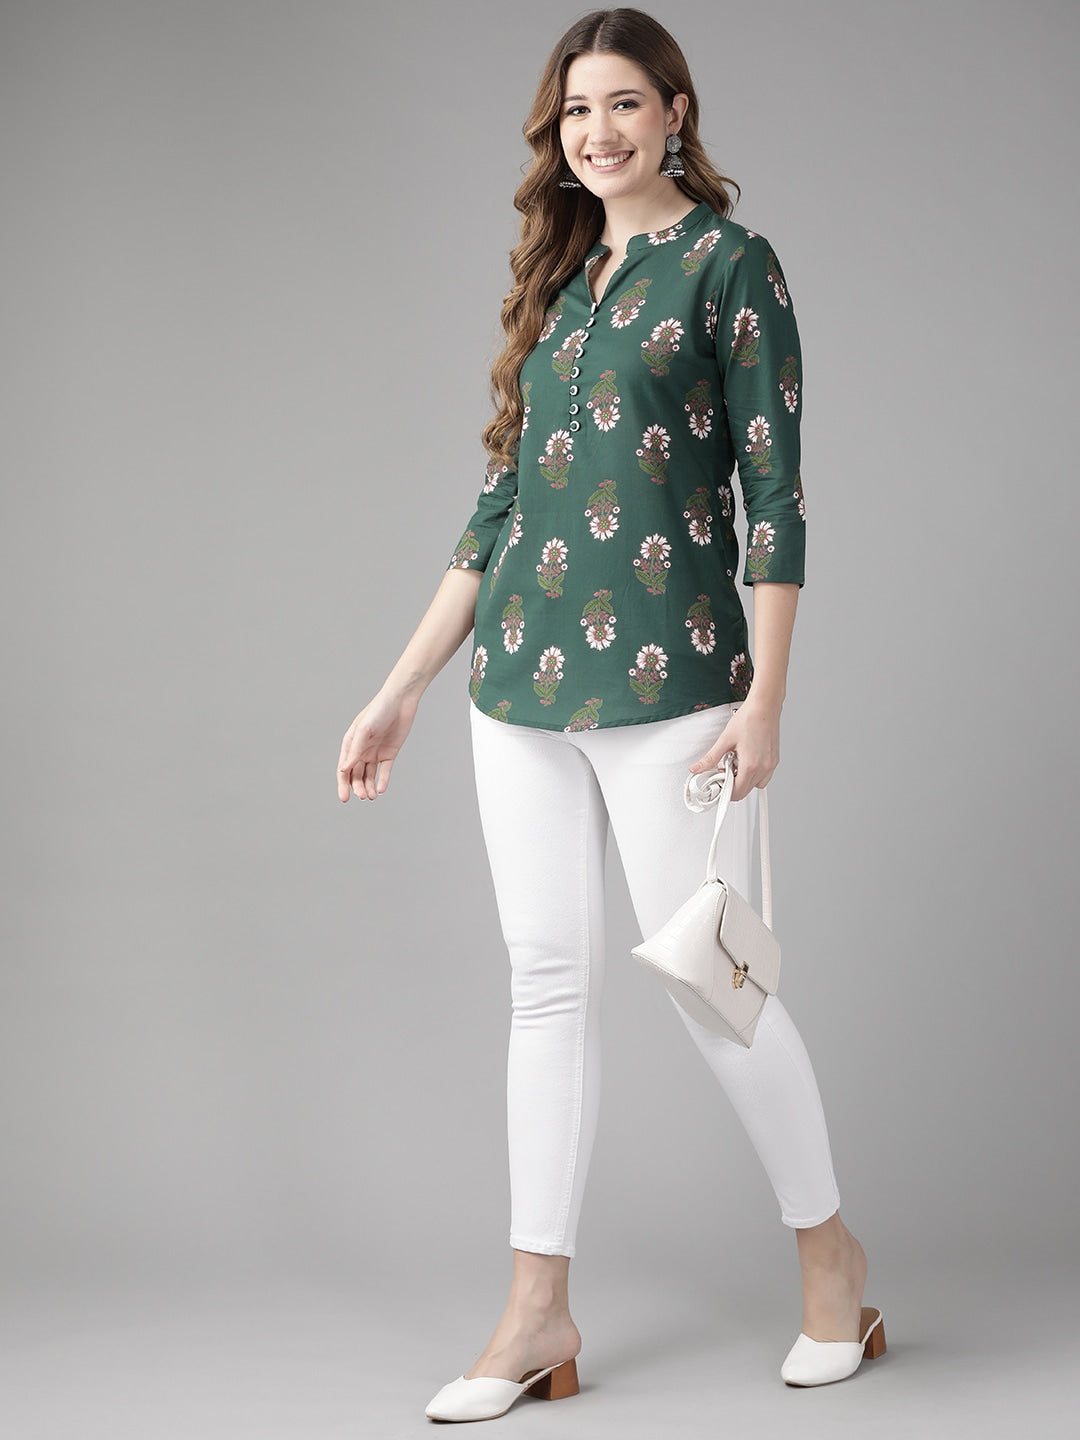 Green Floral Printed Top Yufta Store